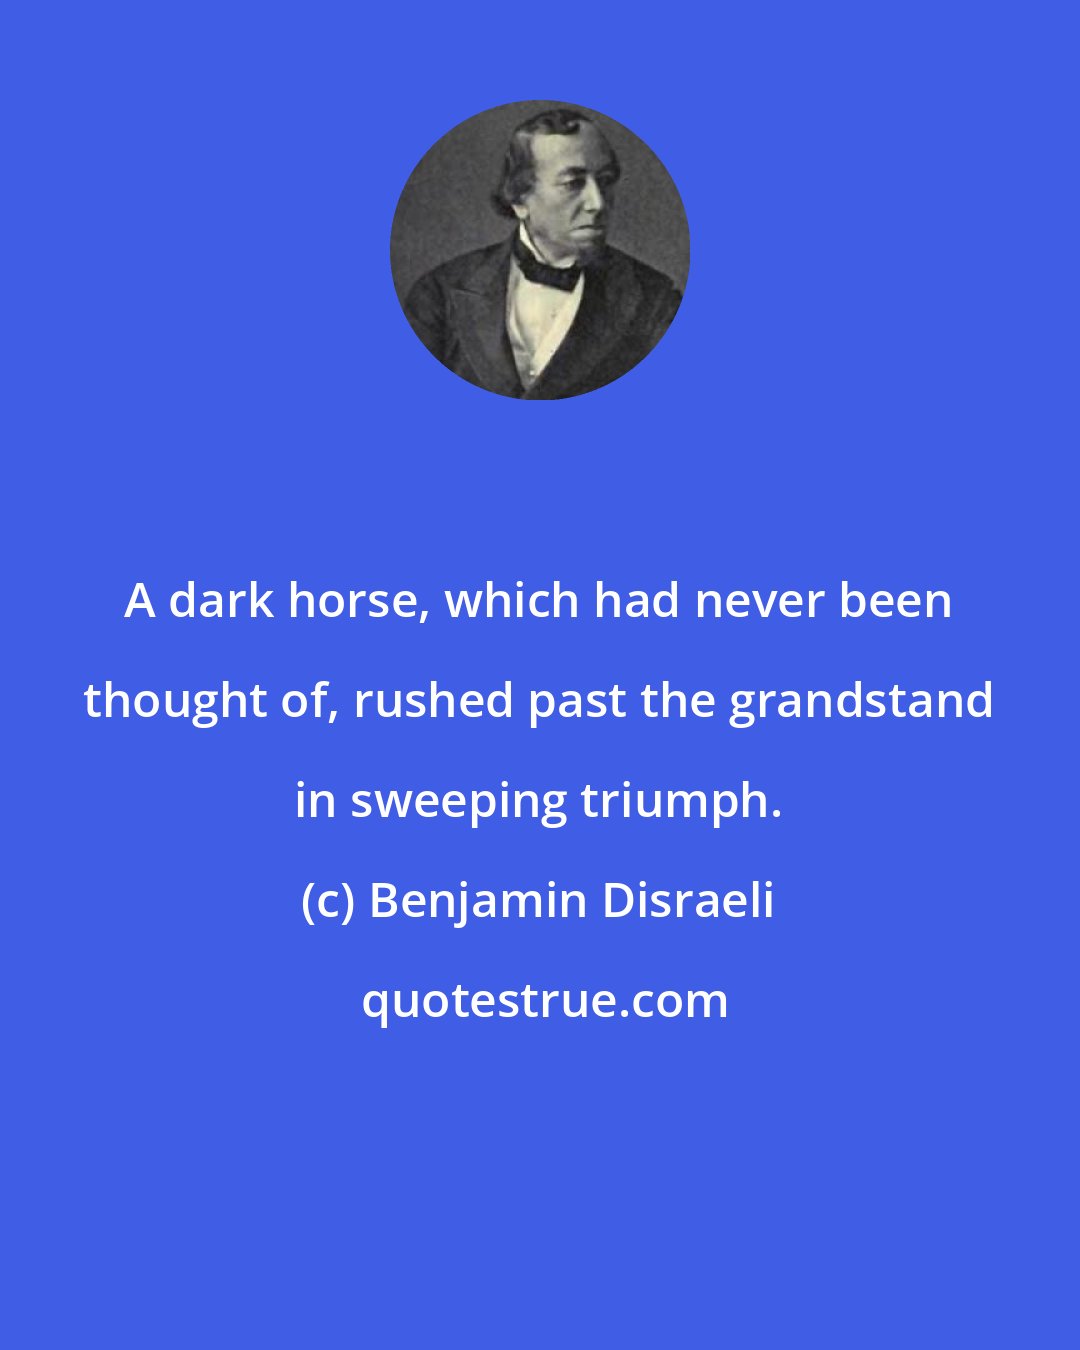 Benjamin Disraeli: A dark horse, which had never been thought of, rushed past the grandstand in sweeping triumph.